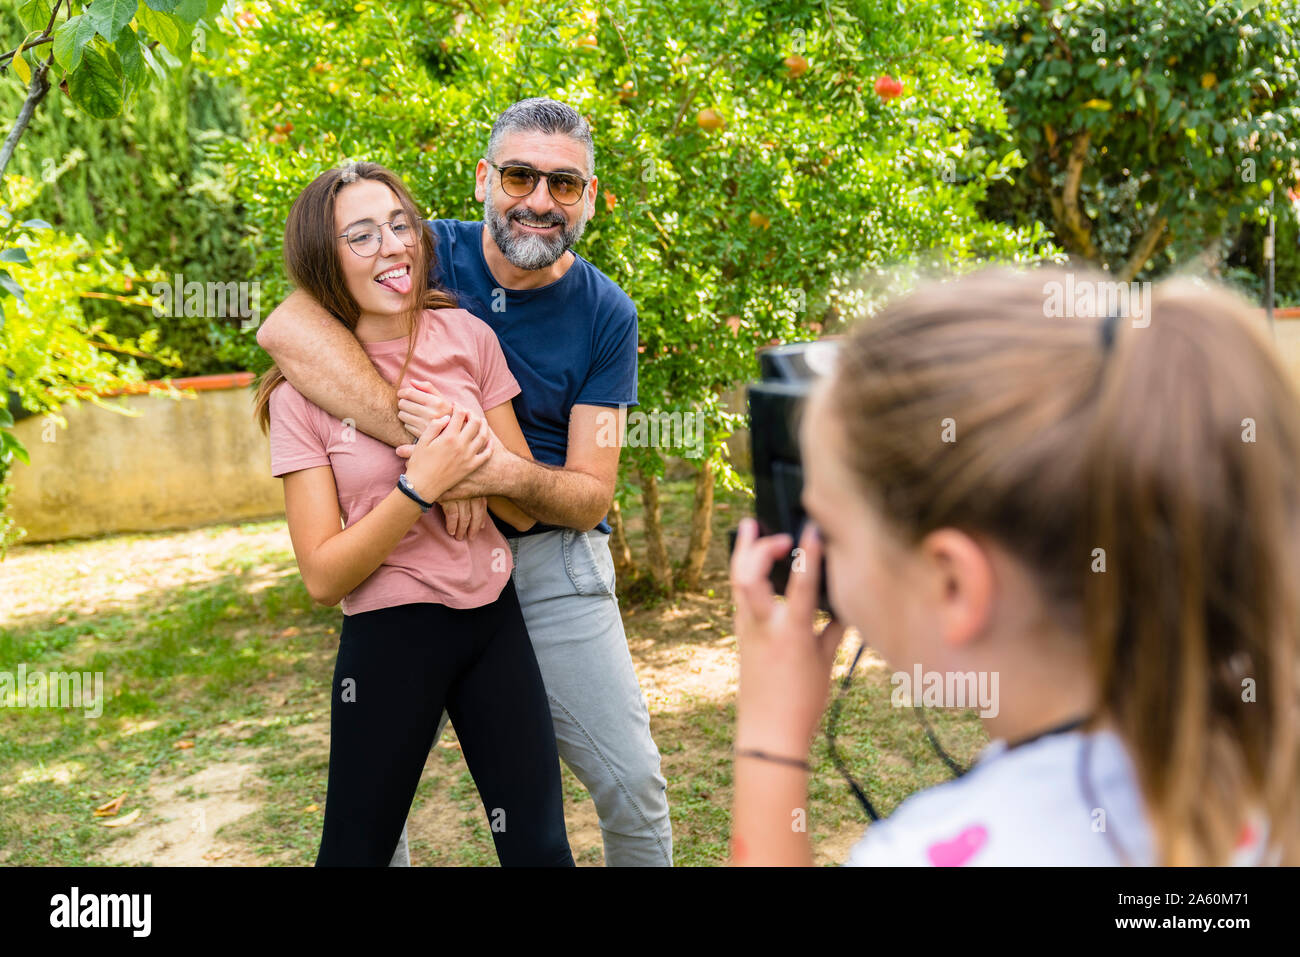 Girl taking a picture of happy father with daughter in garden Stock Photo